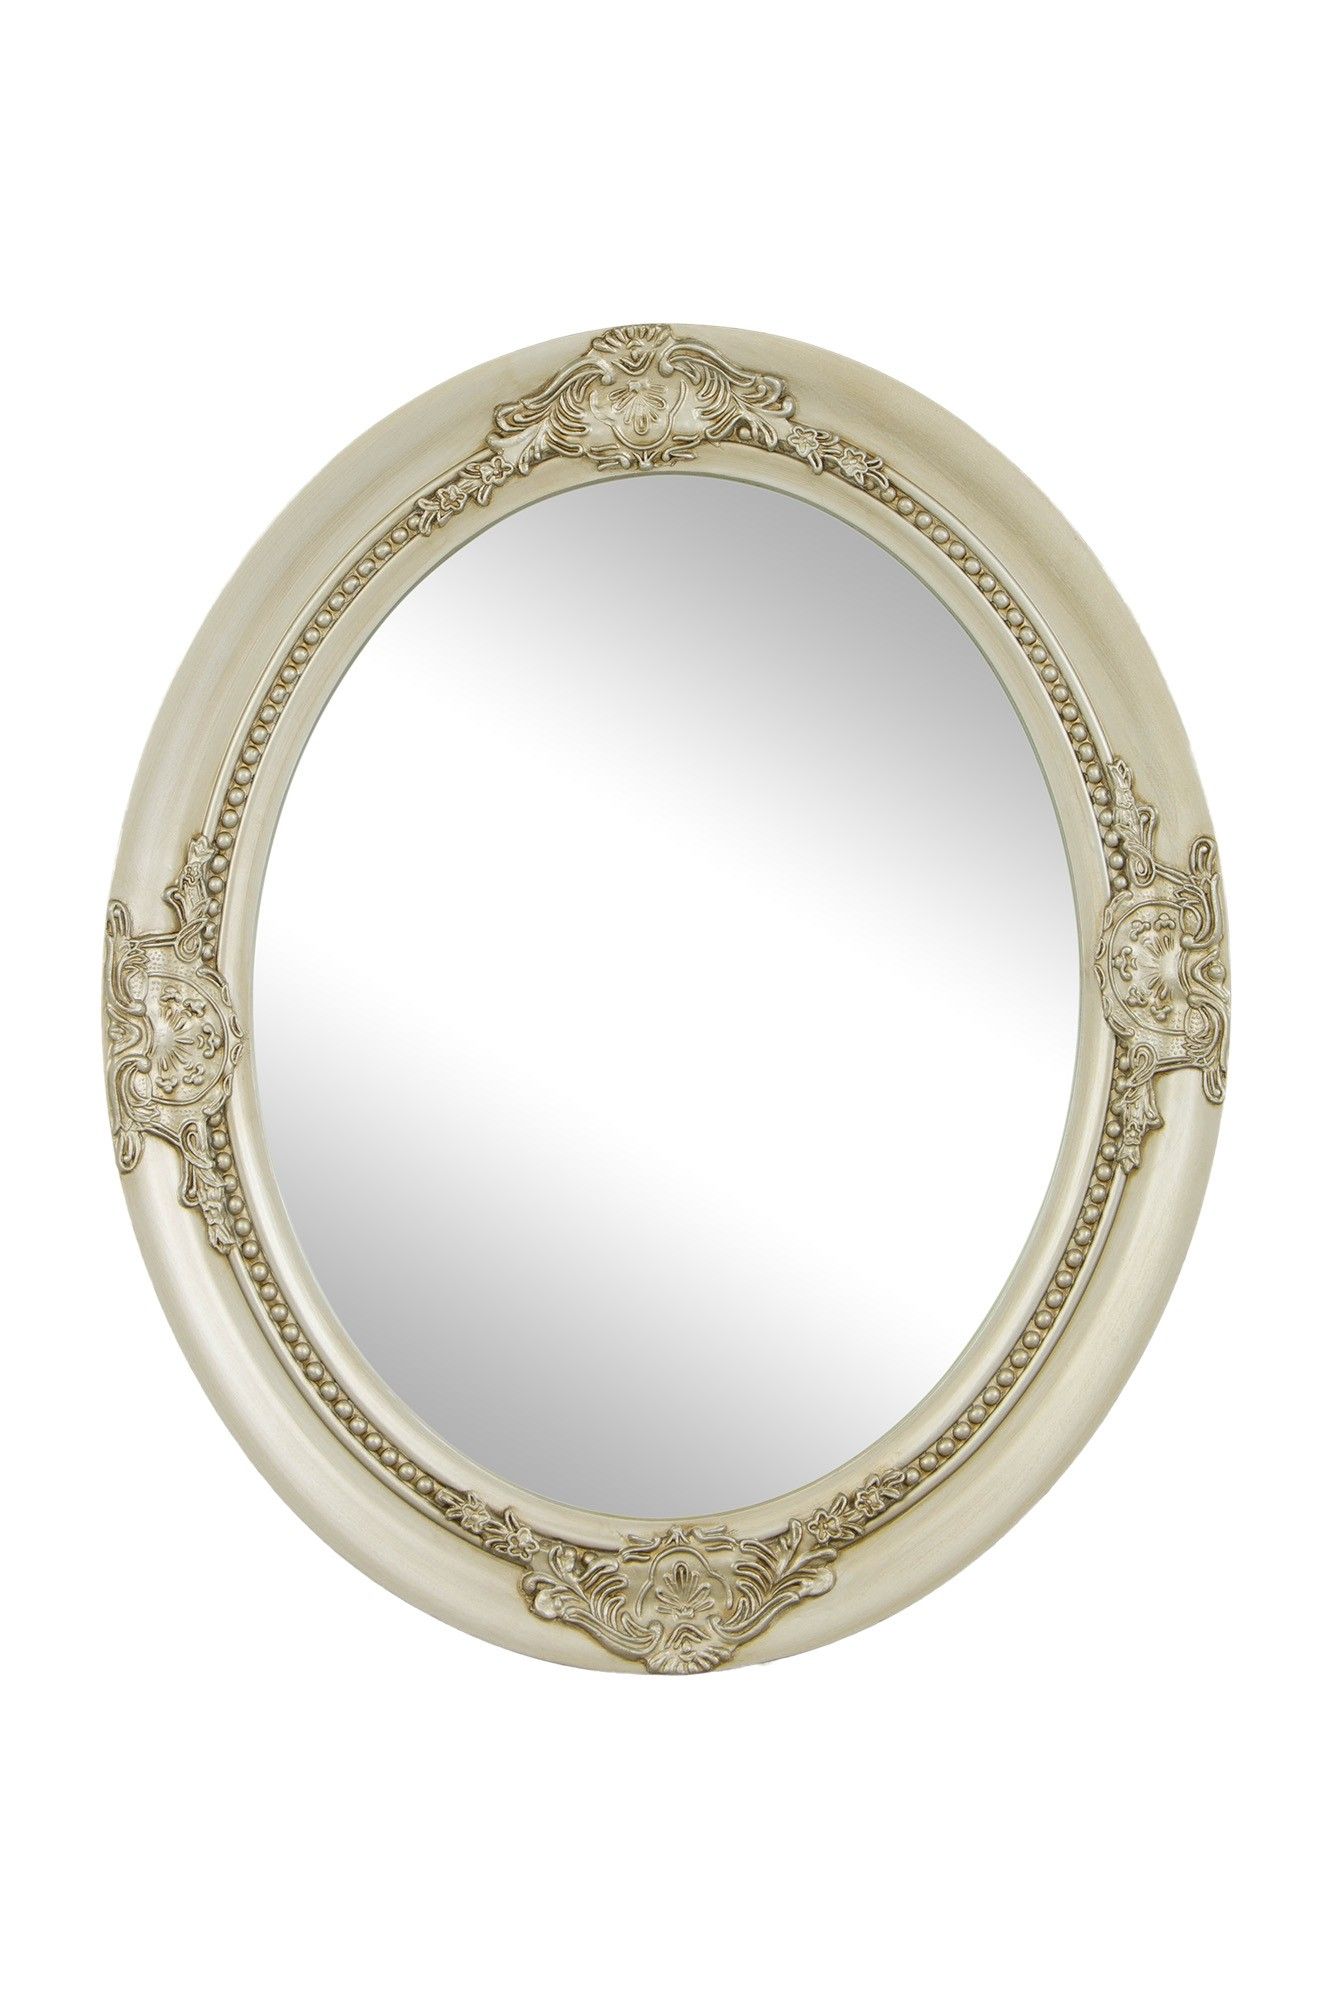 Veral Oval Hanging Mirror Antique Silver 63cmx52cm | Furniture & Home For Antique Silver Oval Wall Mirrors (View 5 of 15)